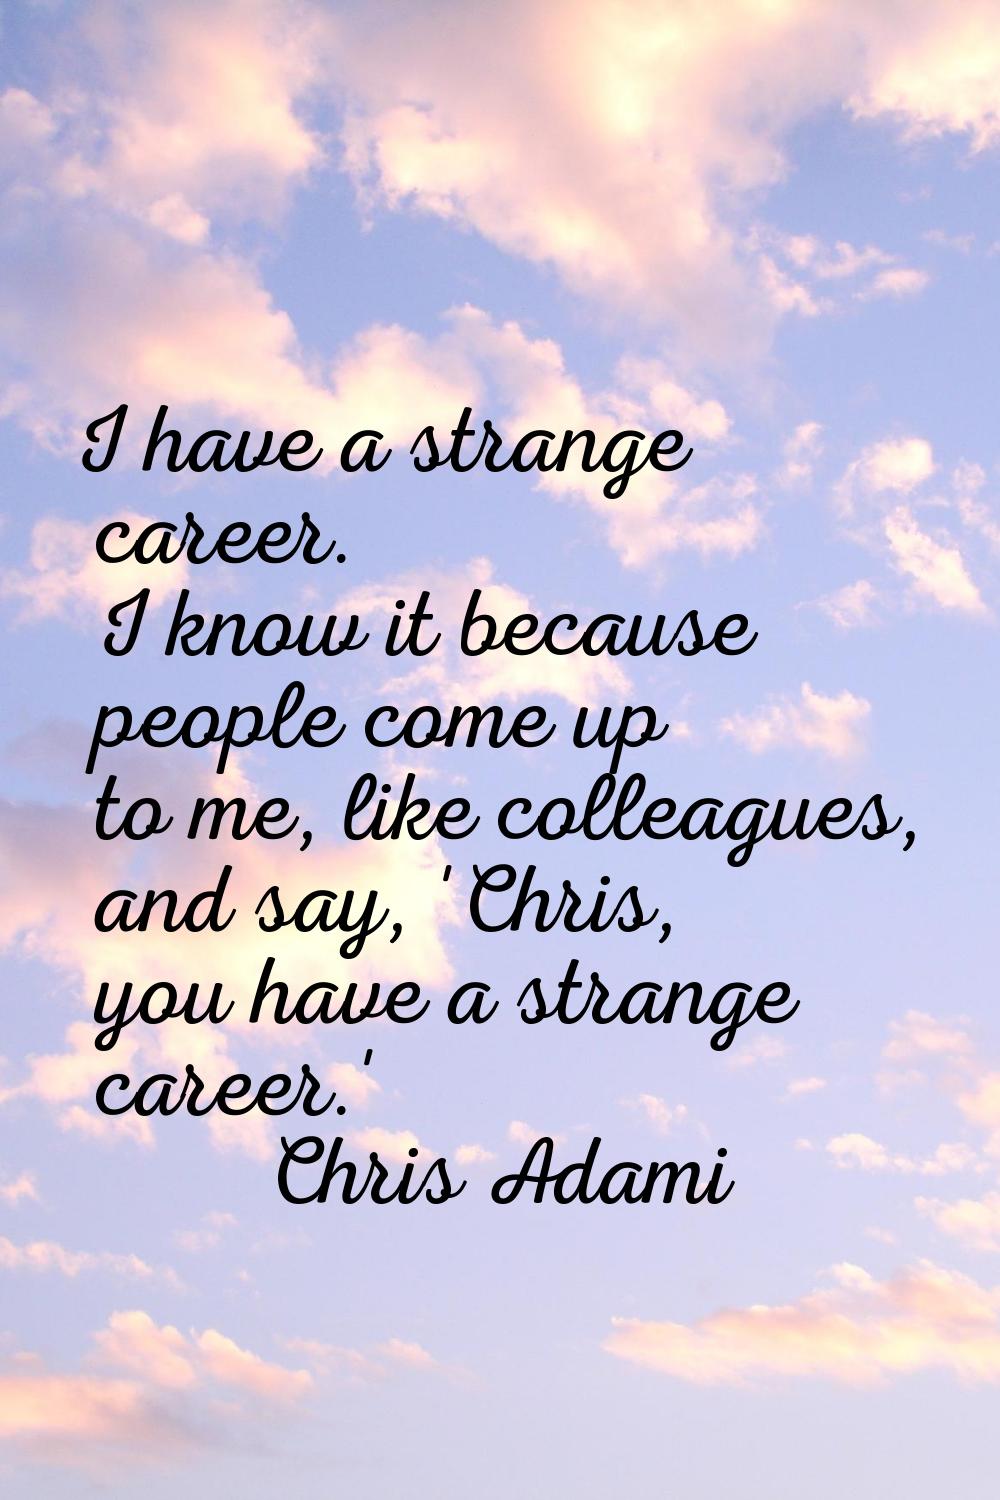 I have a strange career. I know it because people come up to me, like colleagues, and say, 'Chris, 